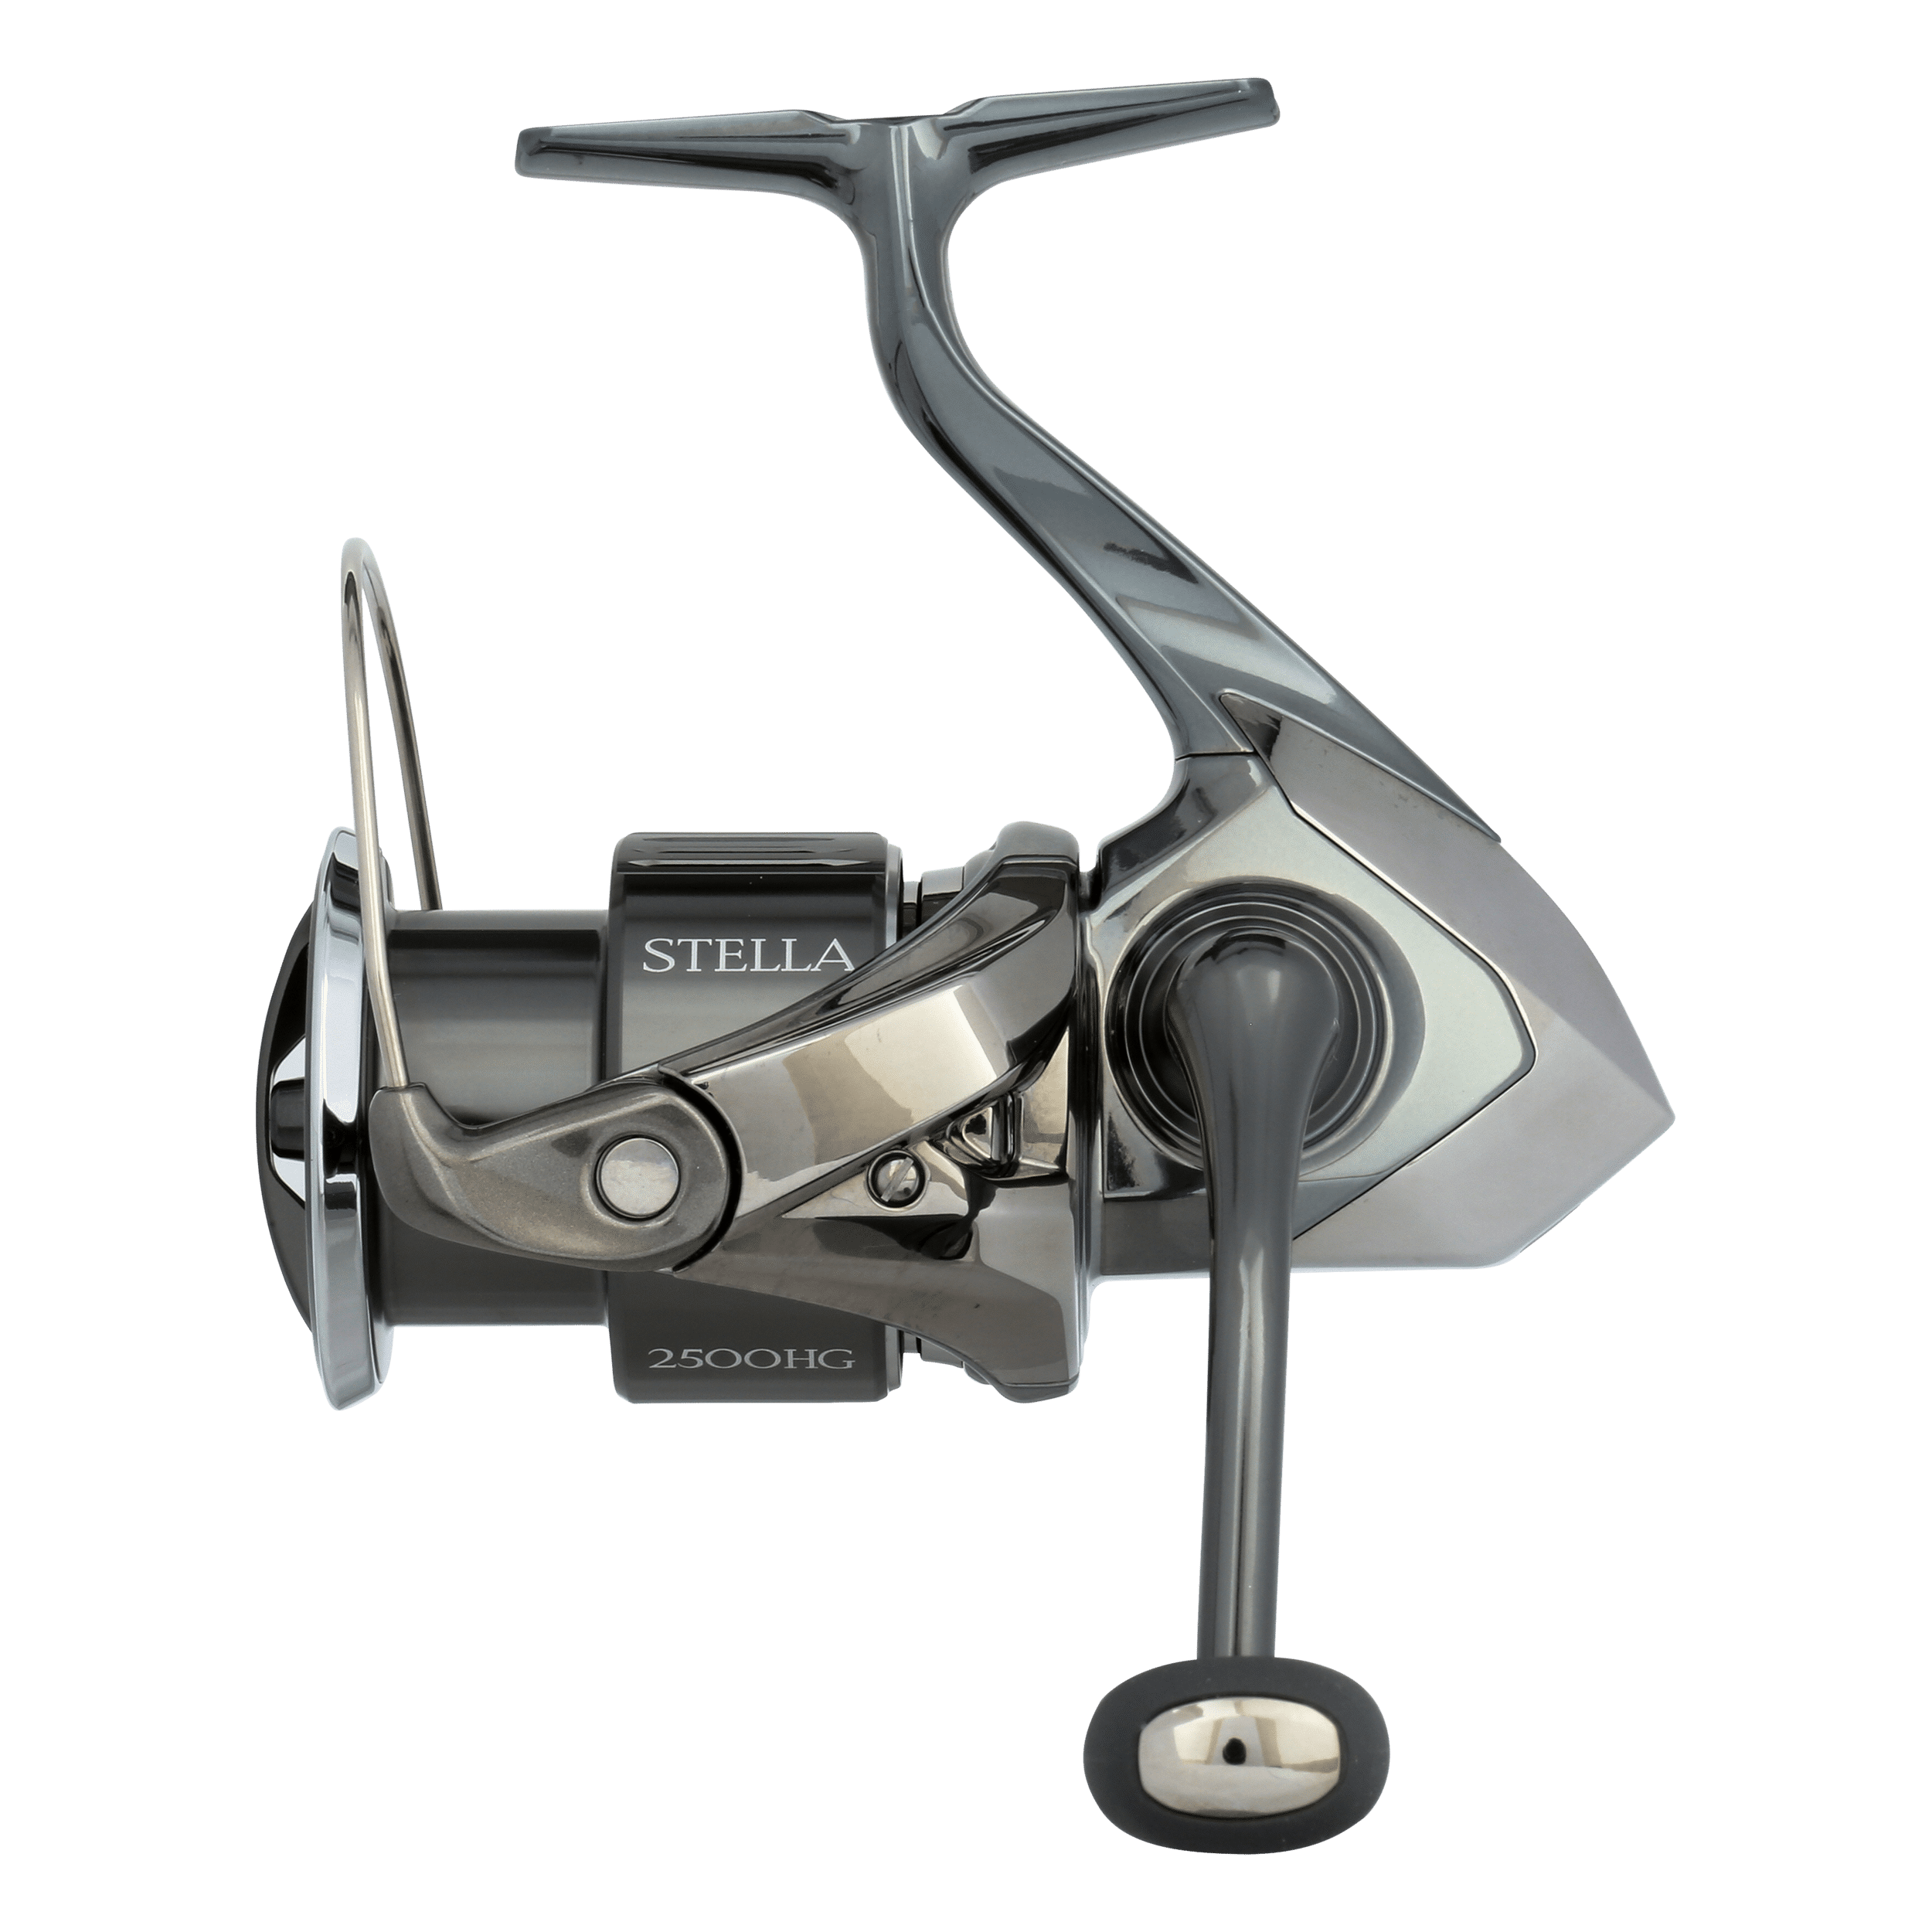 SHIMANO] Genuine Spare Parts for 22 STELLA 2500S Product Code: 043870  **Back-order (Shipping in 3-4 weeks after receiving order) - HEDGEHOG STUDIO